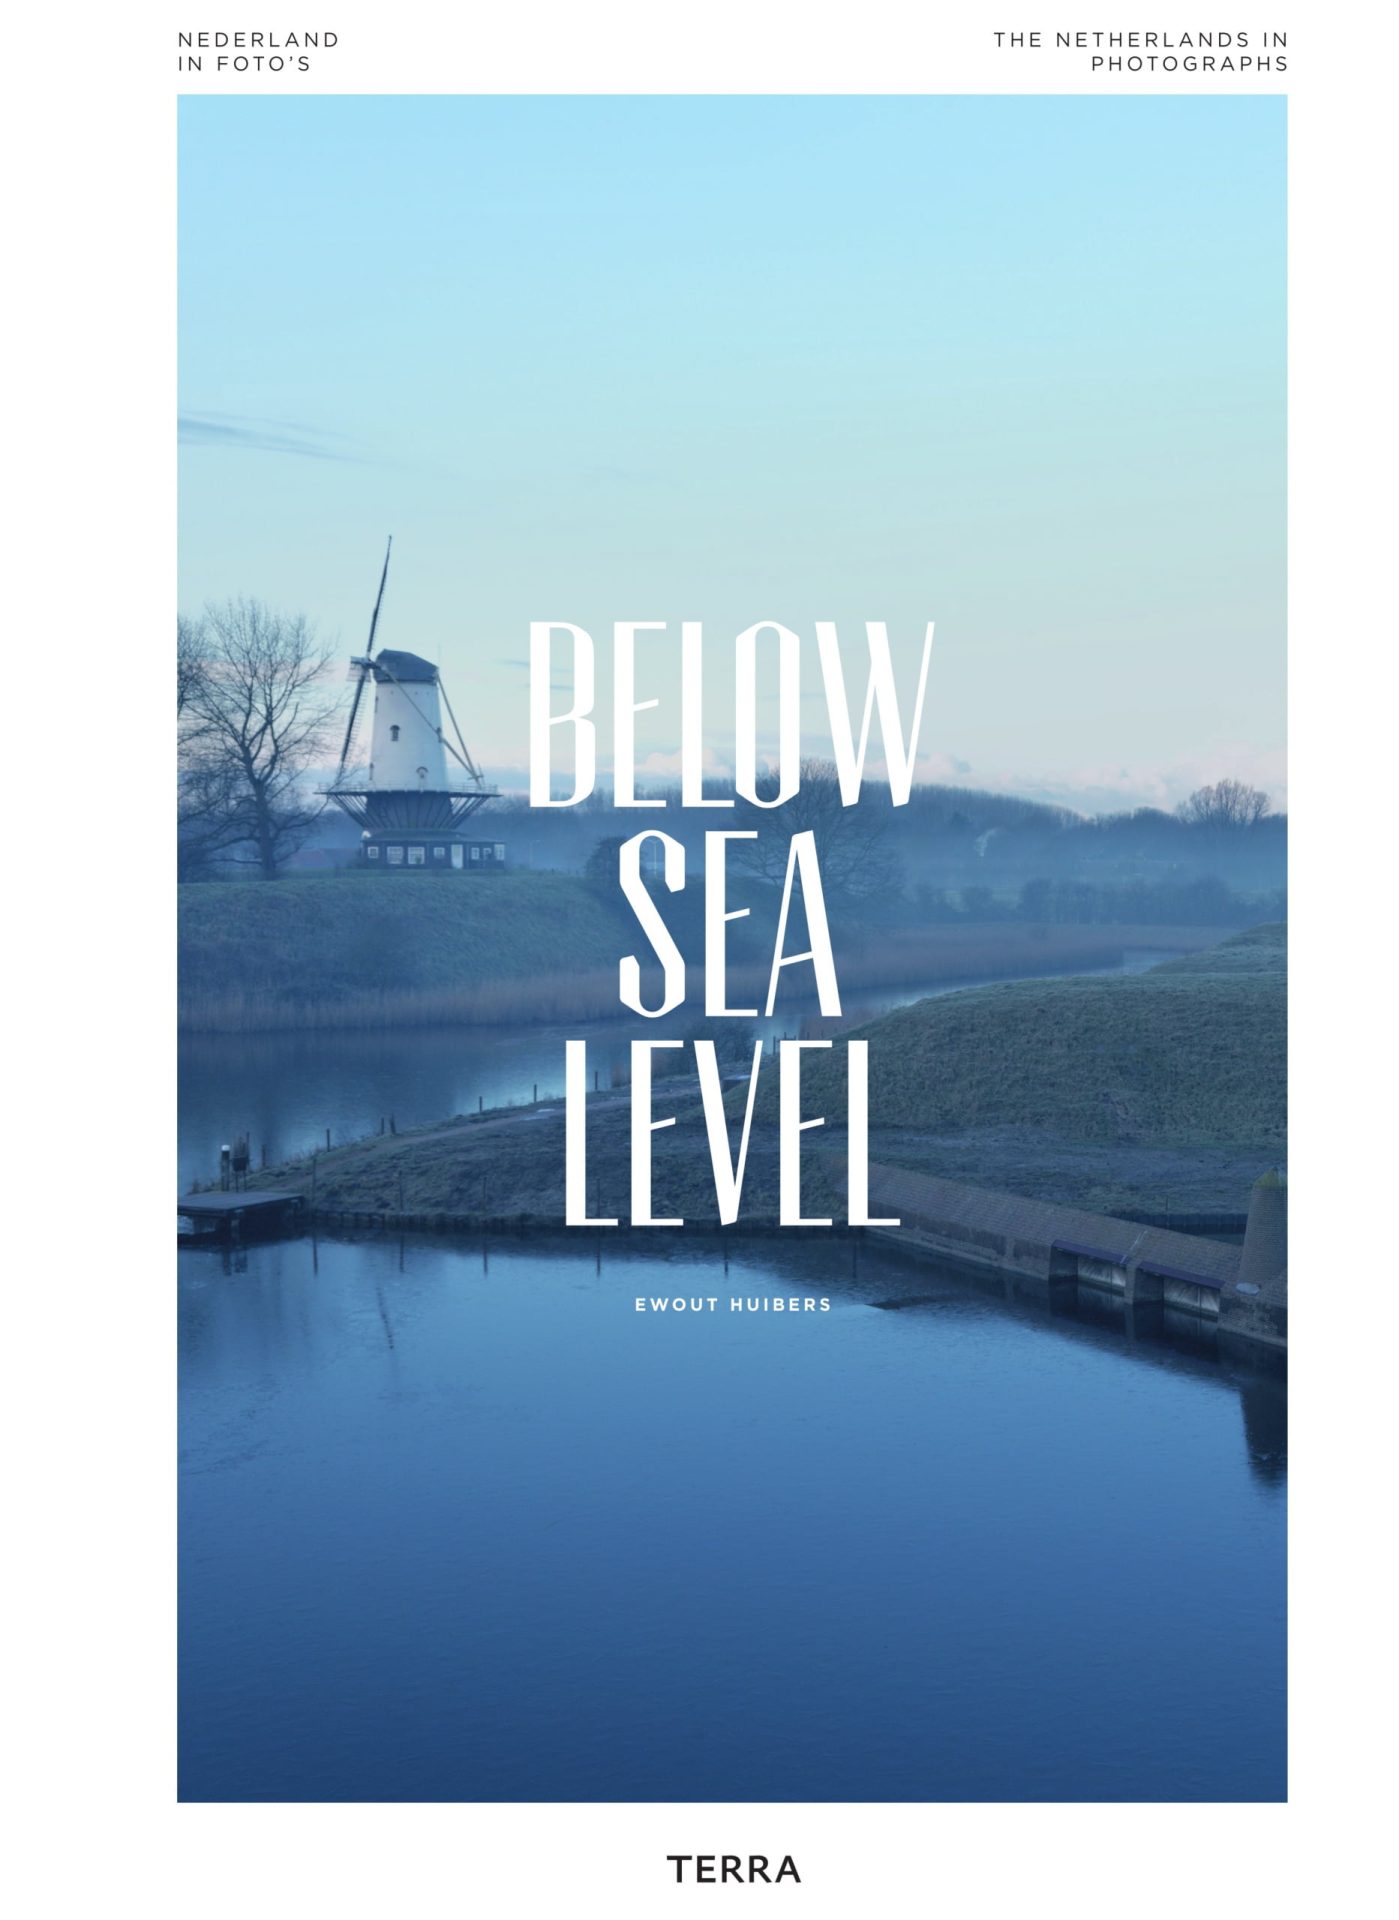 Below Sea Level - The Netherlands in Photographs